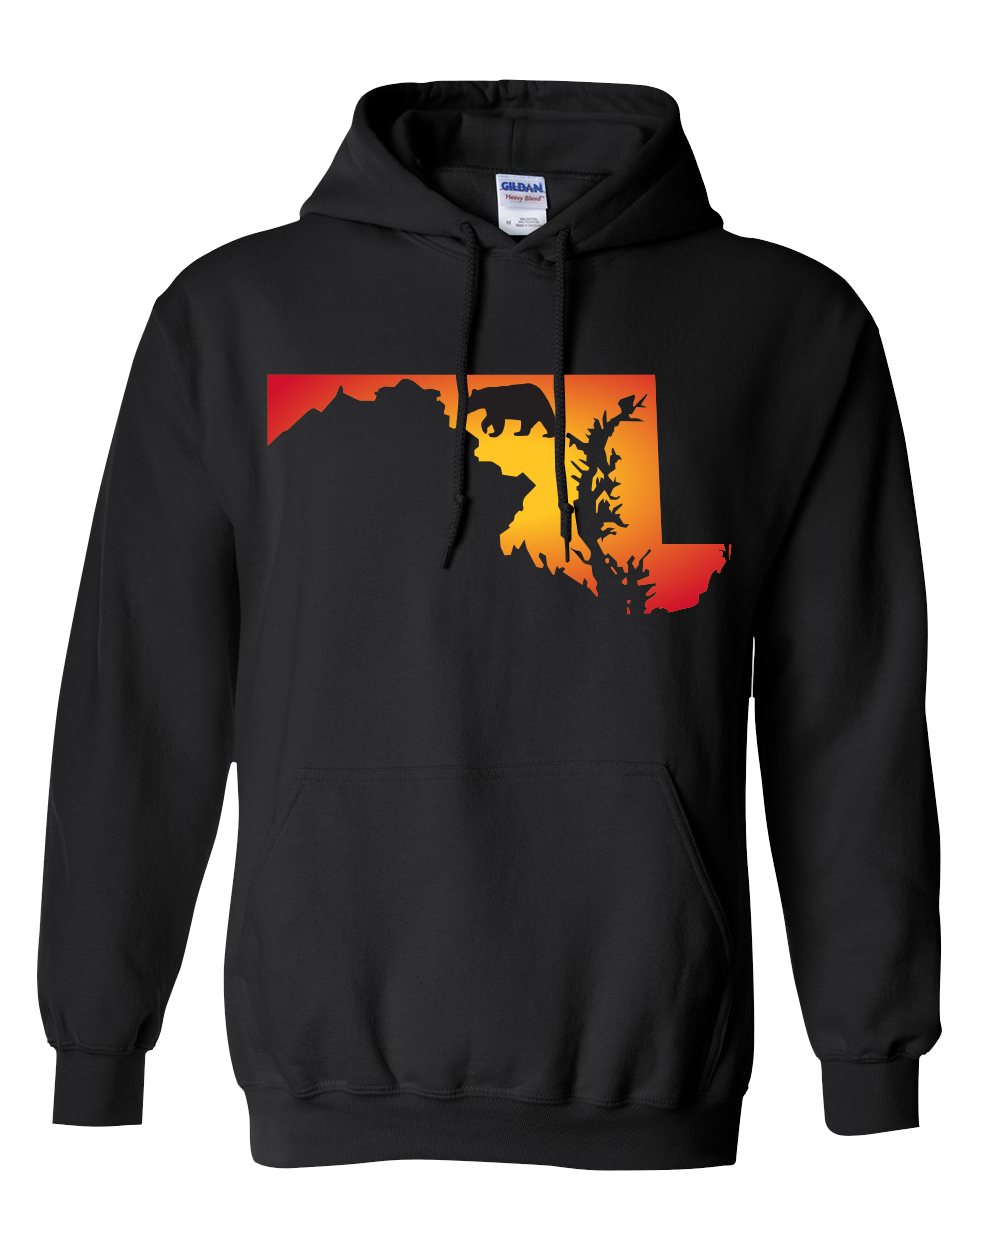 Pullover Hooded Sweatshirt Maryland Black Black Bear Vibrant Design High Quality Tight Knit Ring Spun Low Maintenance Cotton Printed With The Newest Available Color Transfer Technology